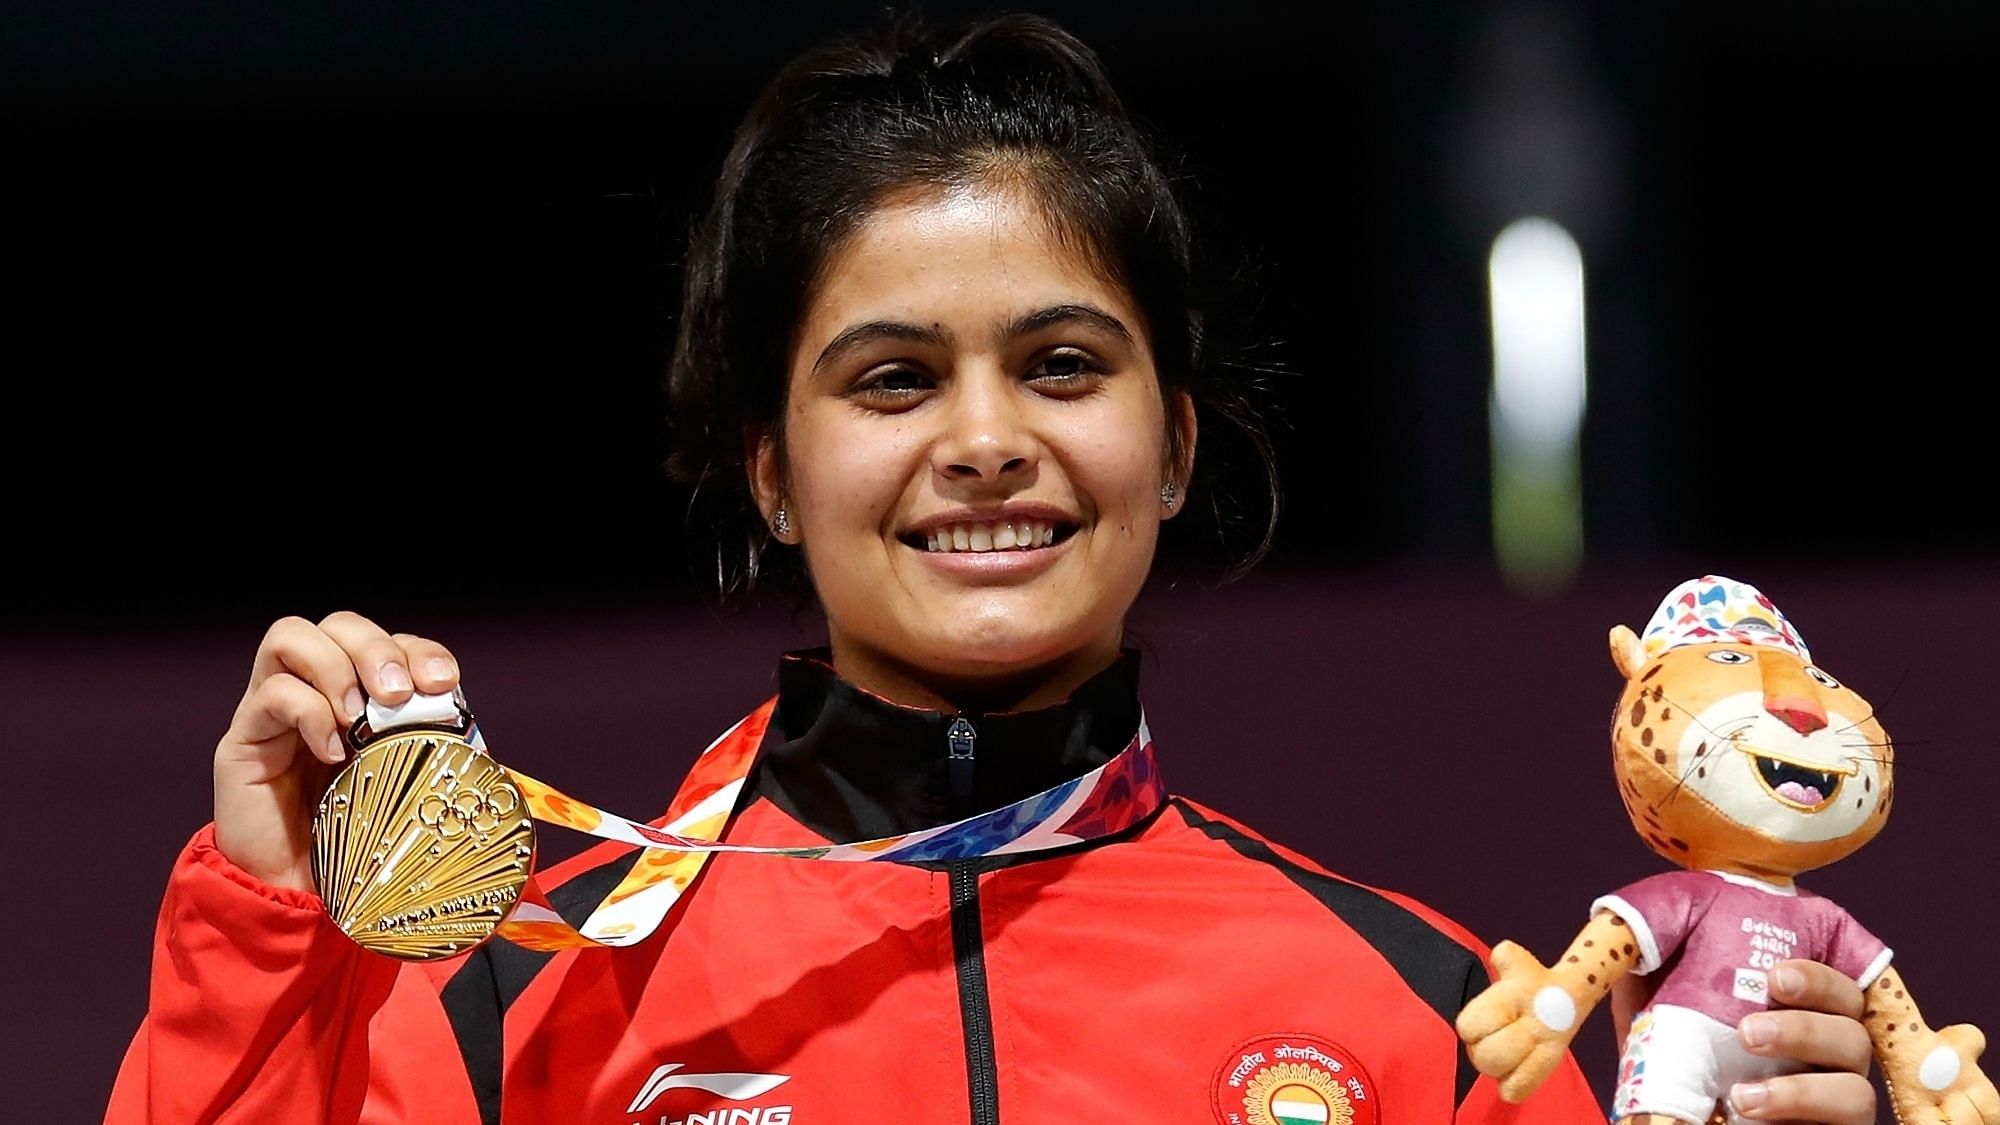 Manu Bhaker is the only the second Indian shooter after Heena Sidhu to win a gold medal in women’s 10m Air Pistol event at the ISSF World Cup.